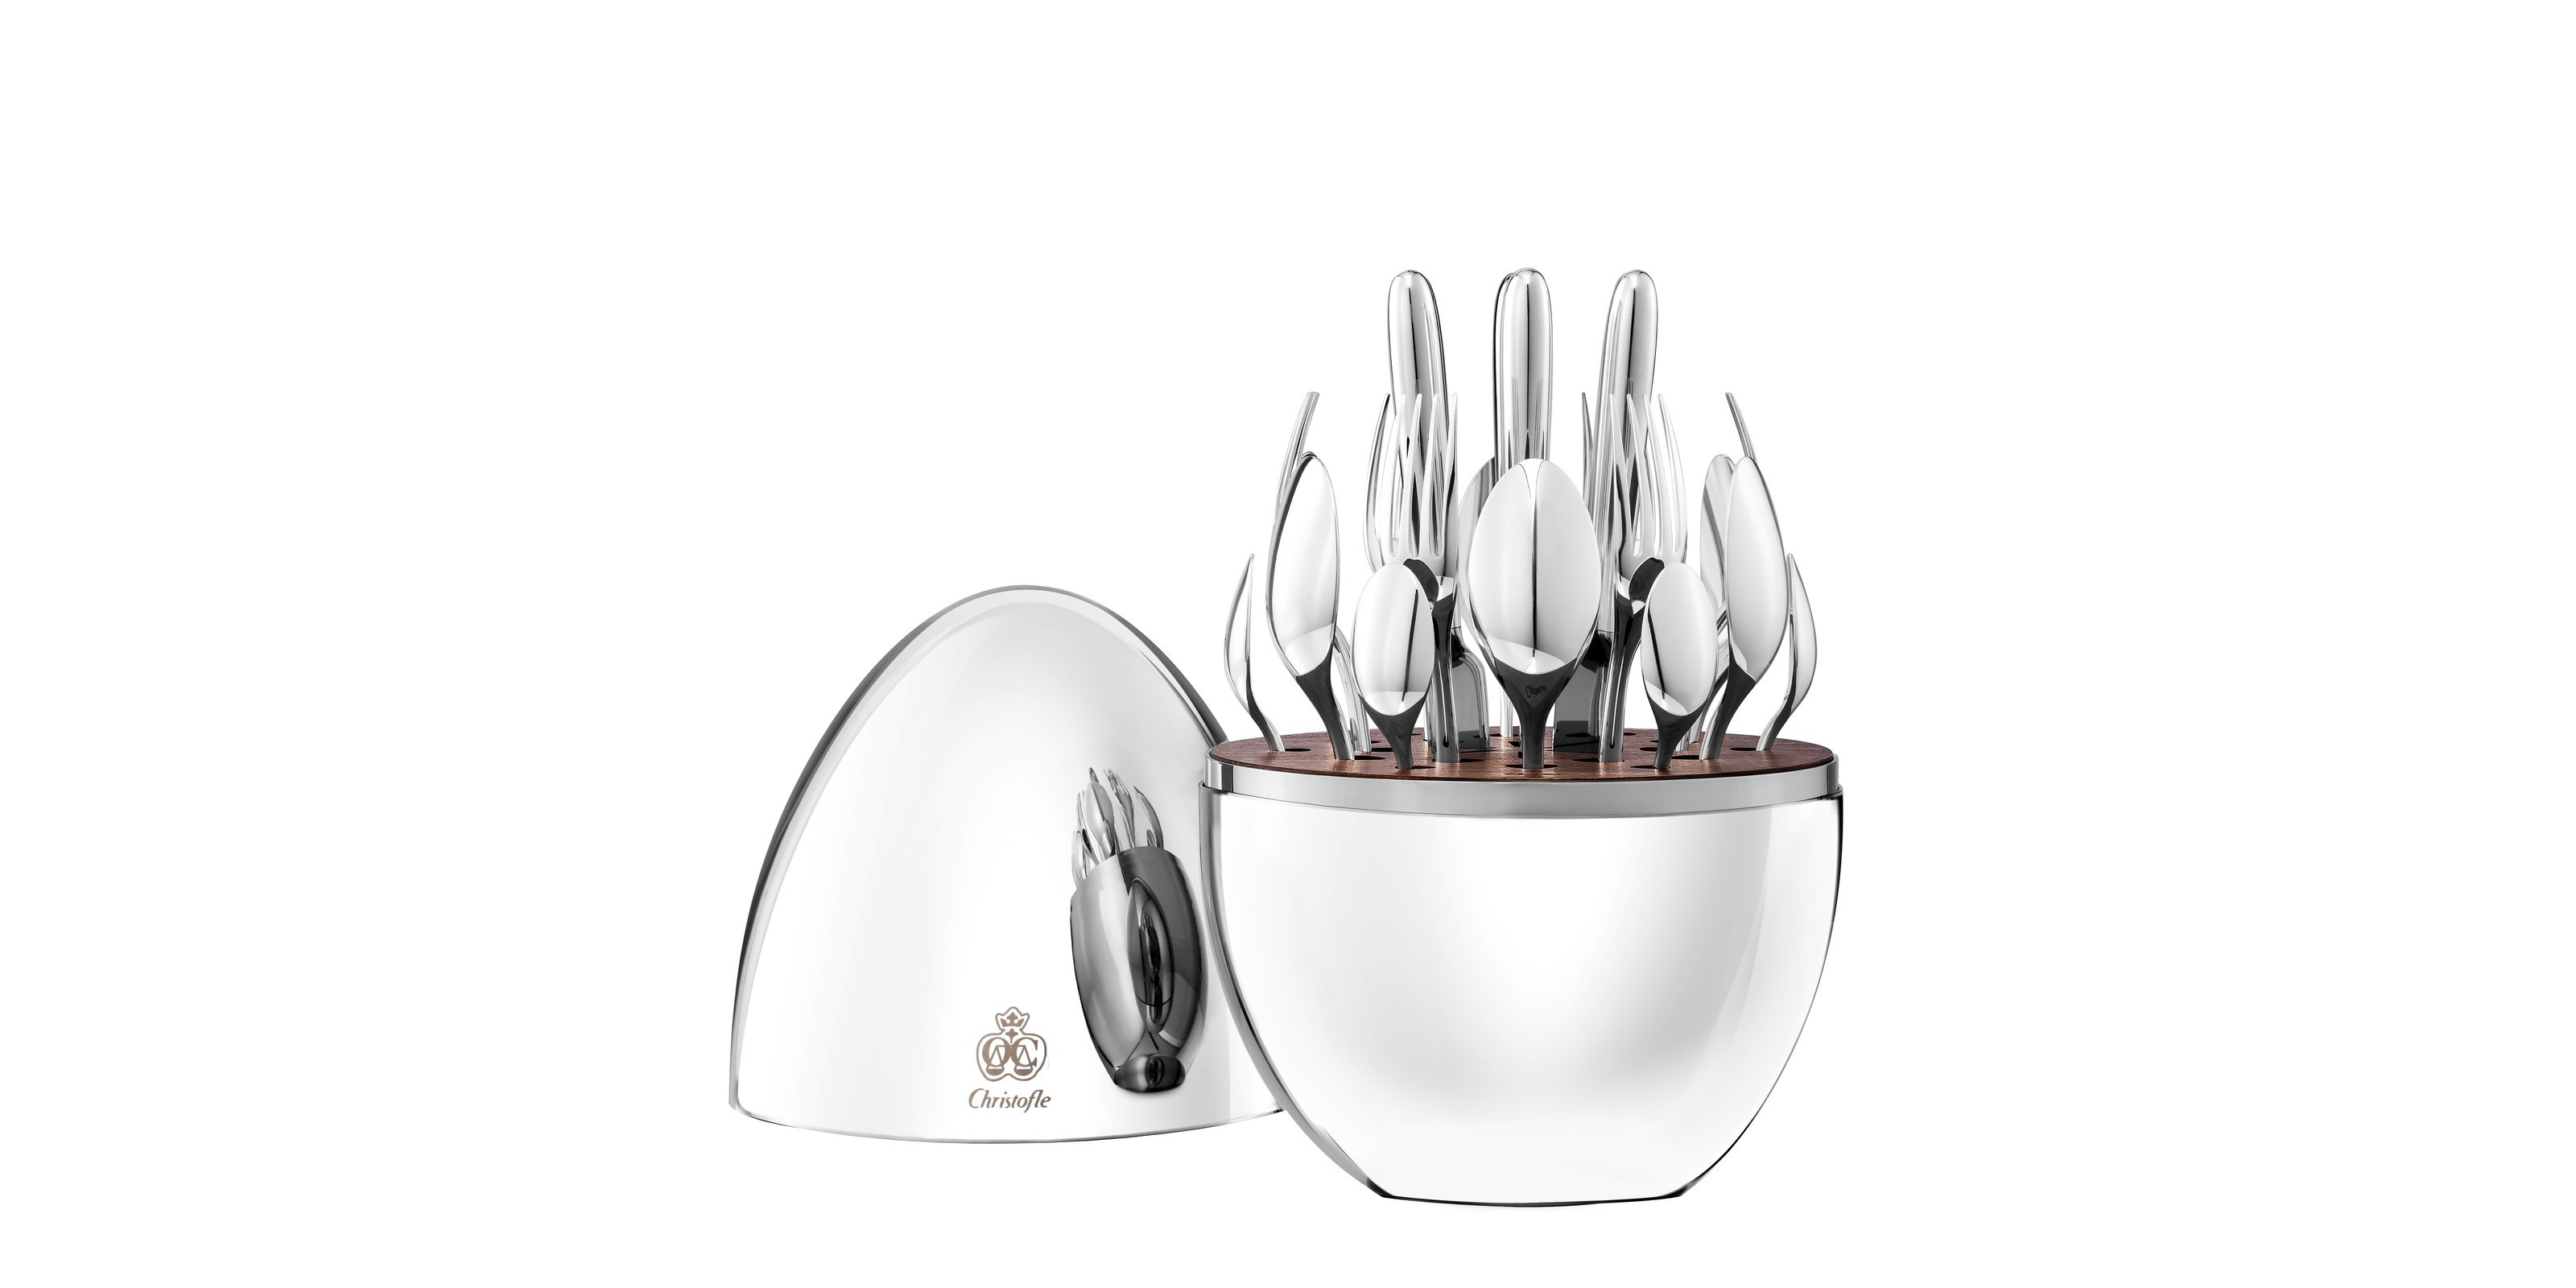 20 attractive Christofle Uni Vase 2024 free download christofle uni vase of 24 piece silver plated flatware set mood for 6 pertaining to diminuer le zoom